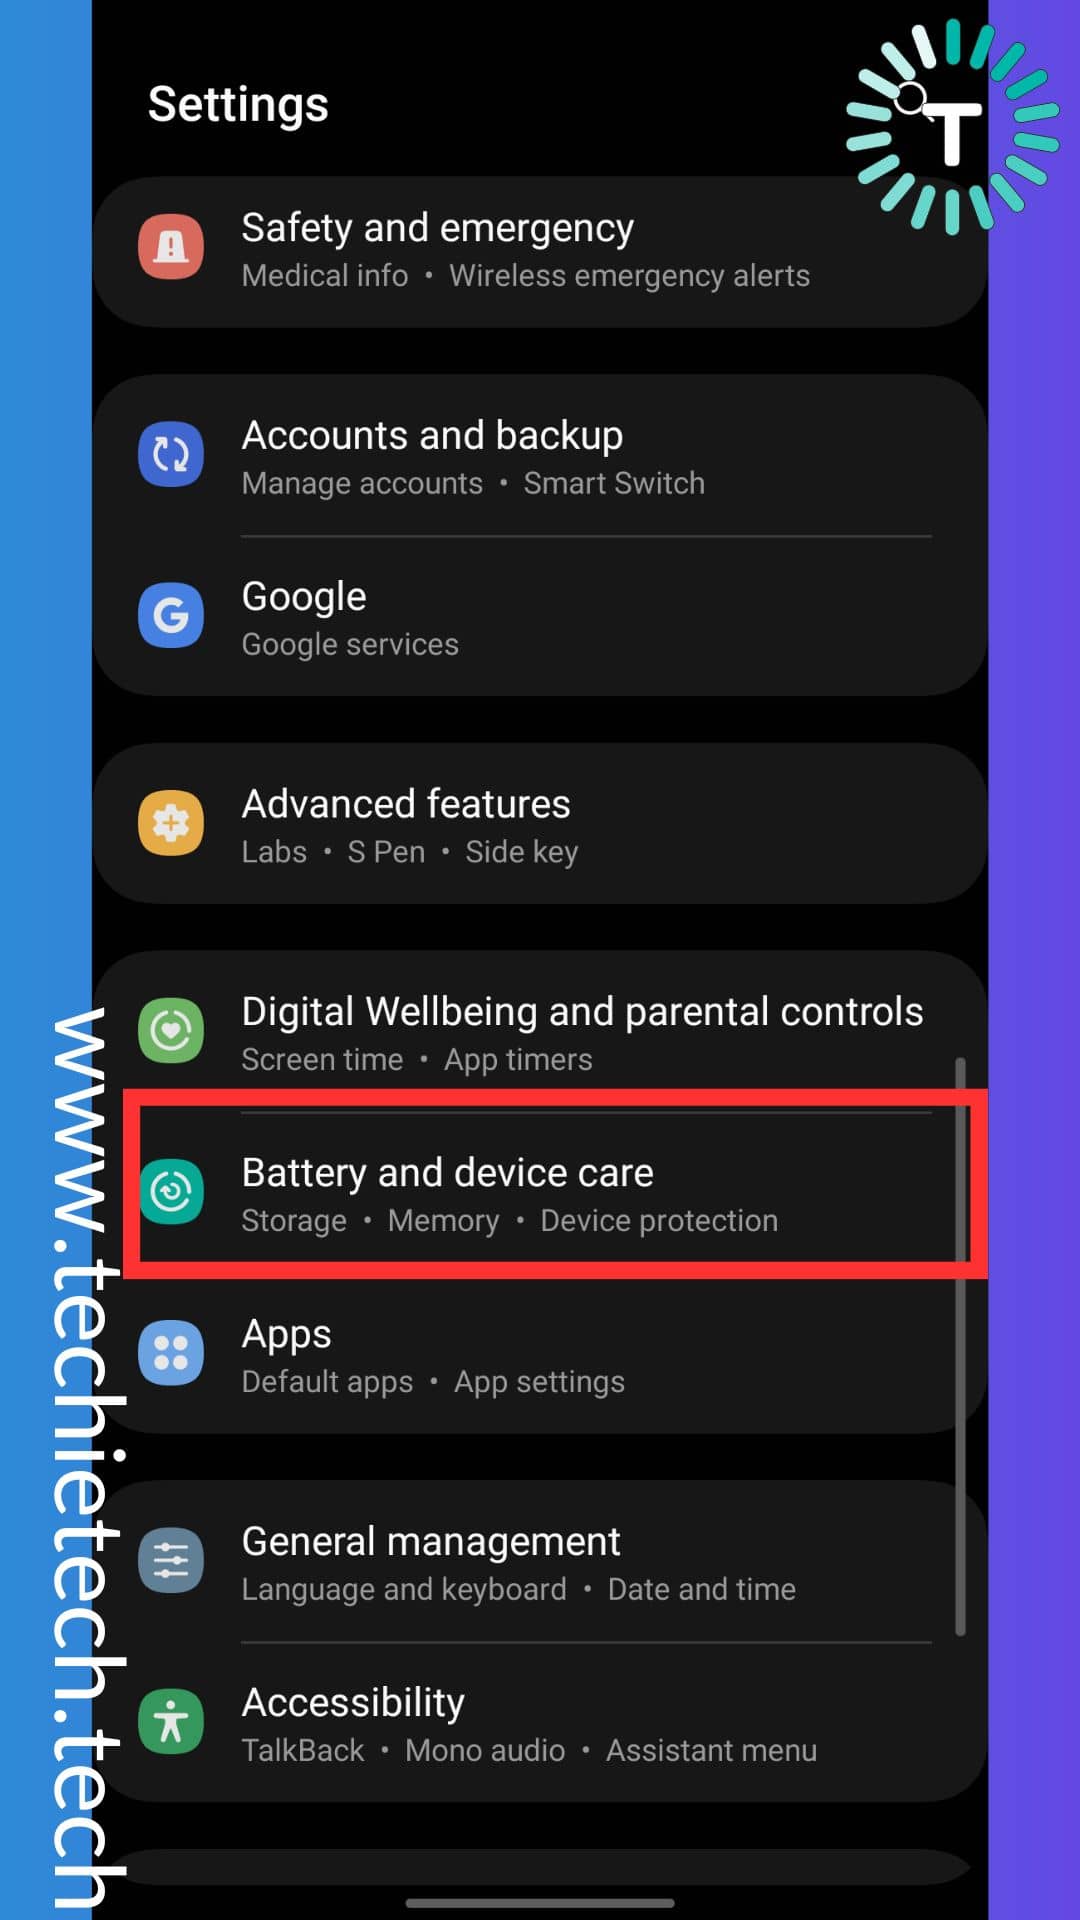 Go to the Settings of the device, and tap on Battery and Device care